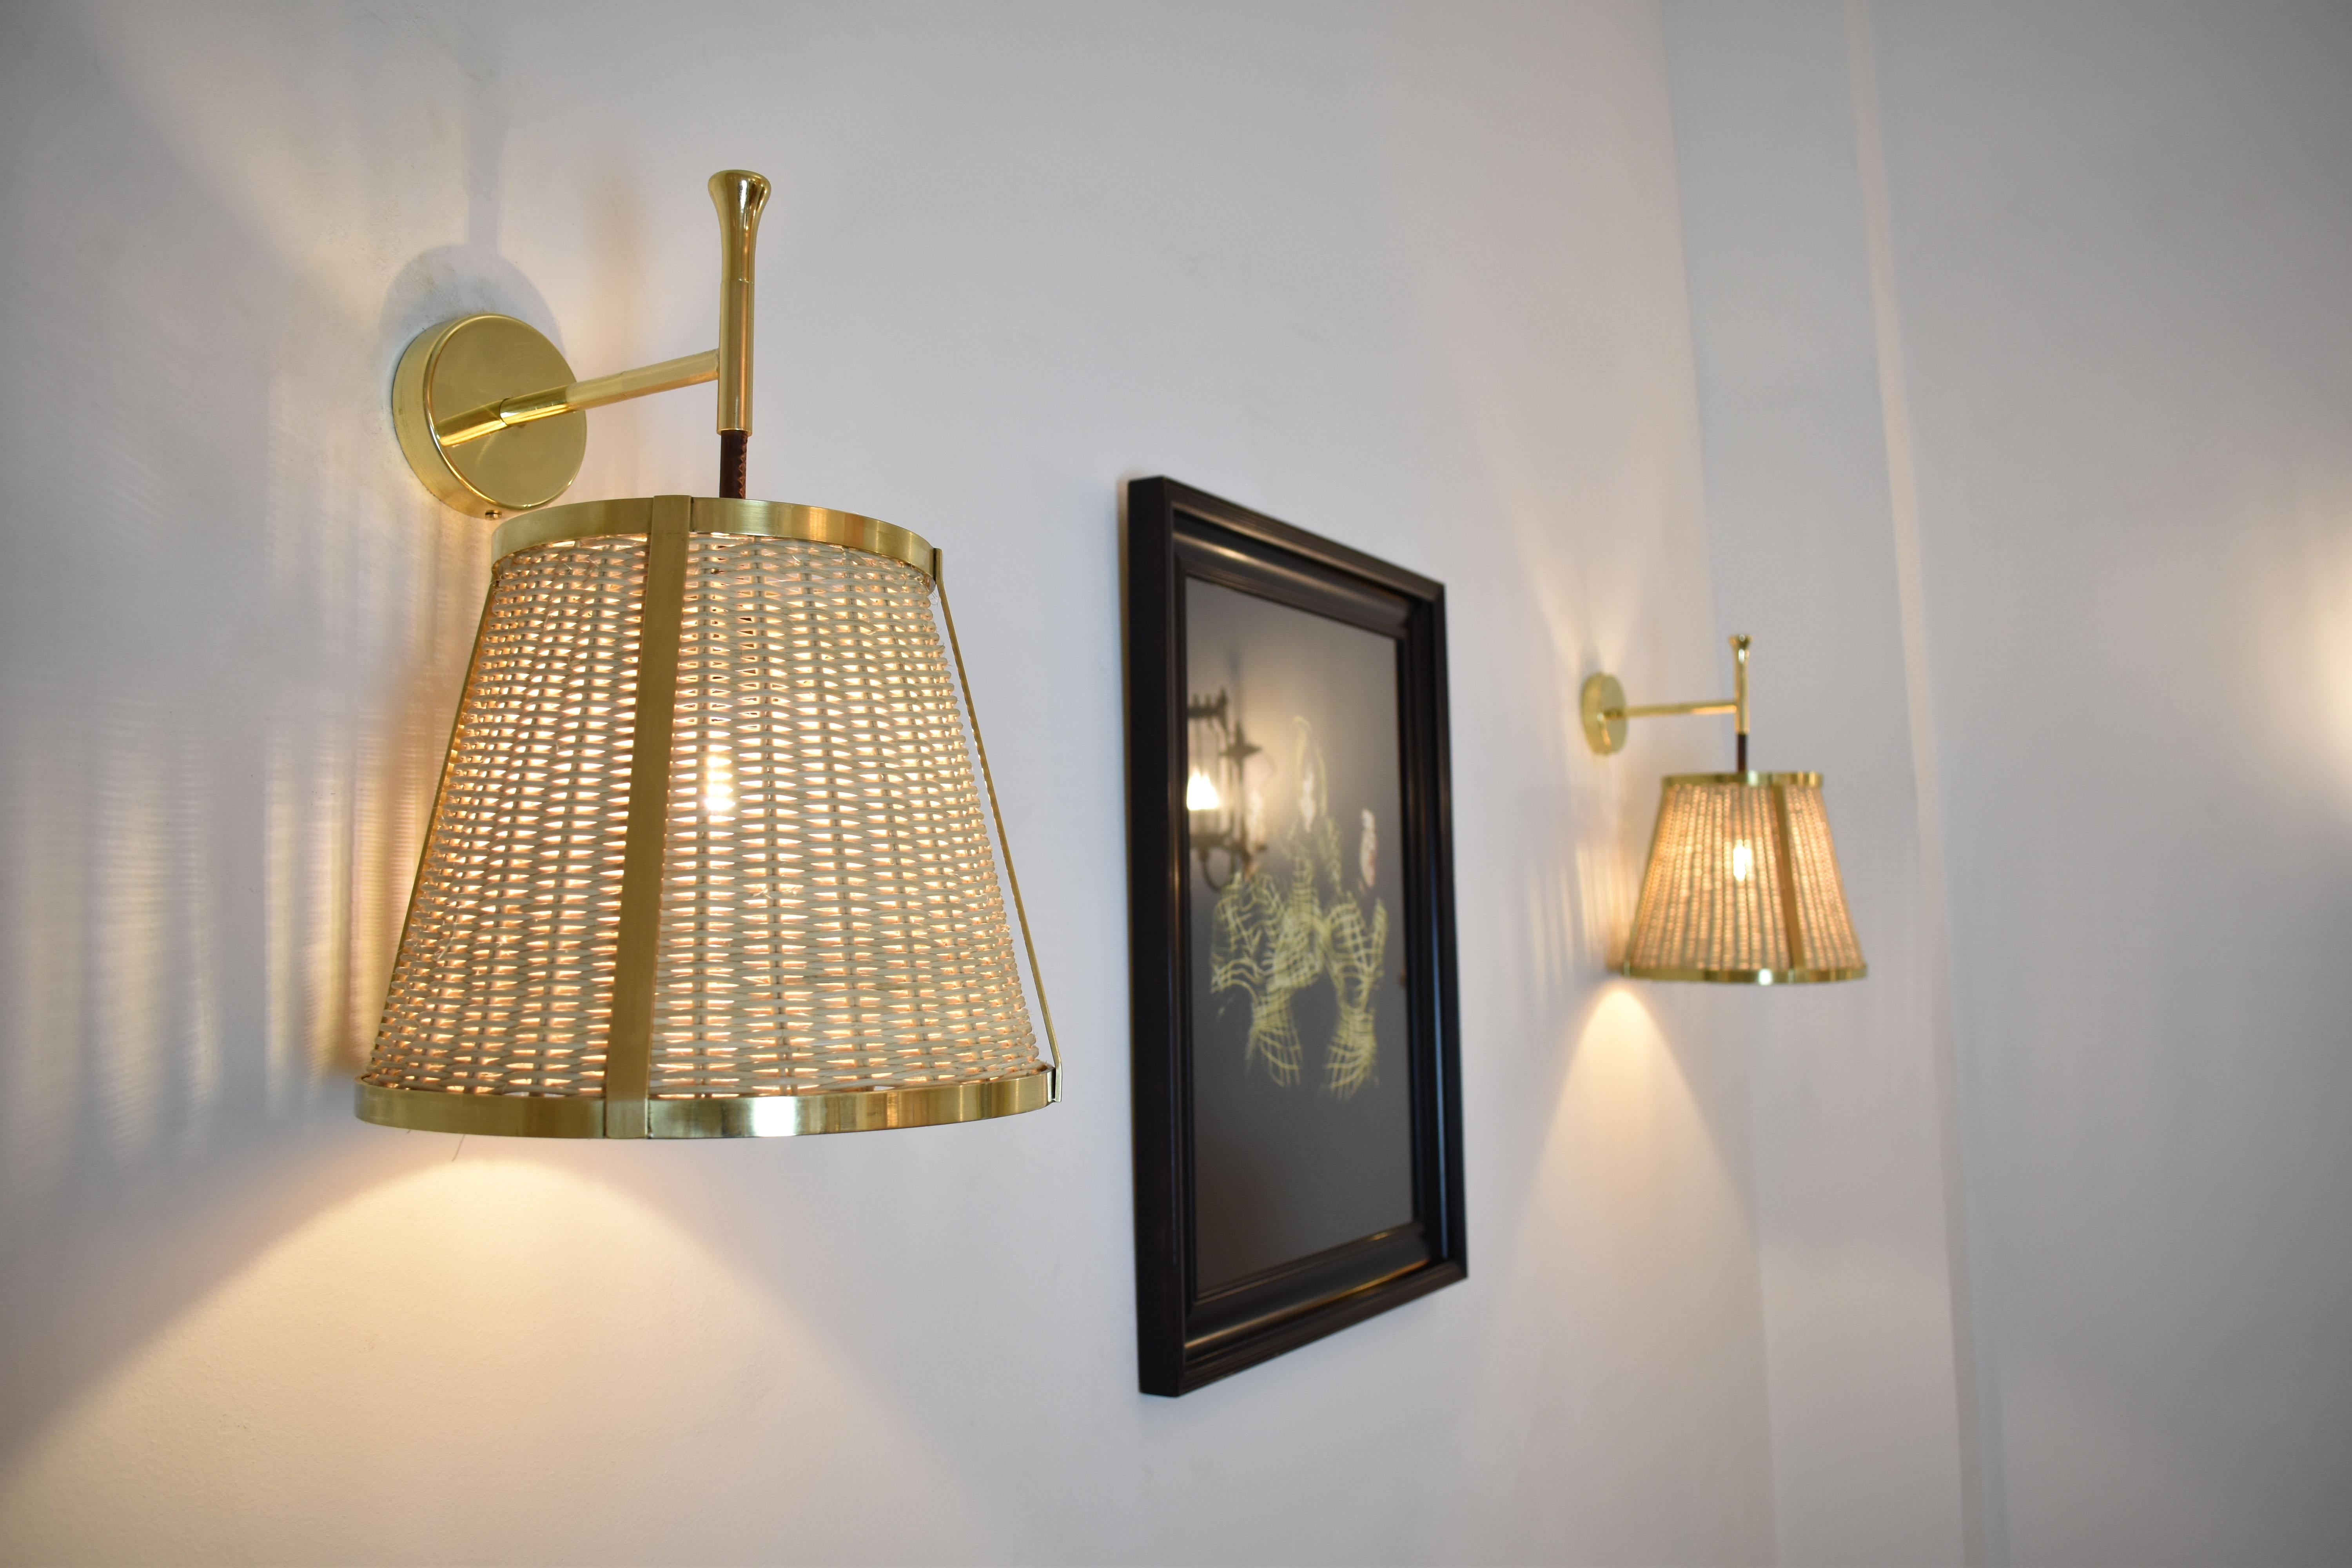 Portuguese Caeli-W4 Brass and Rattan Sconce, Jas For Sale